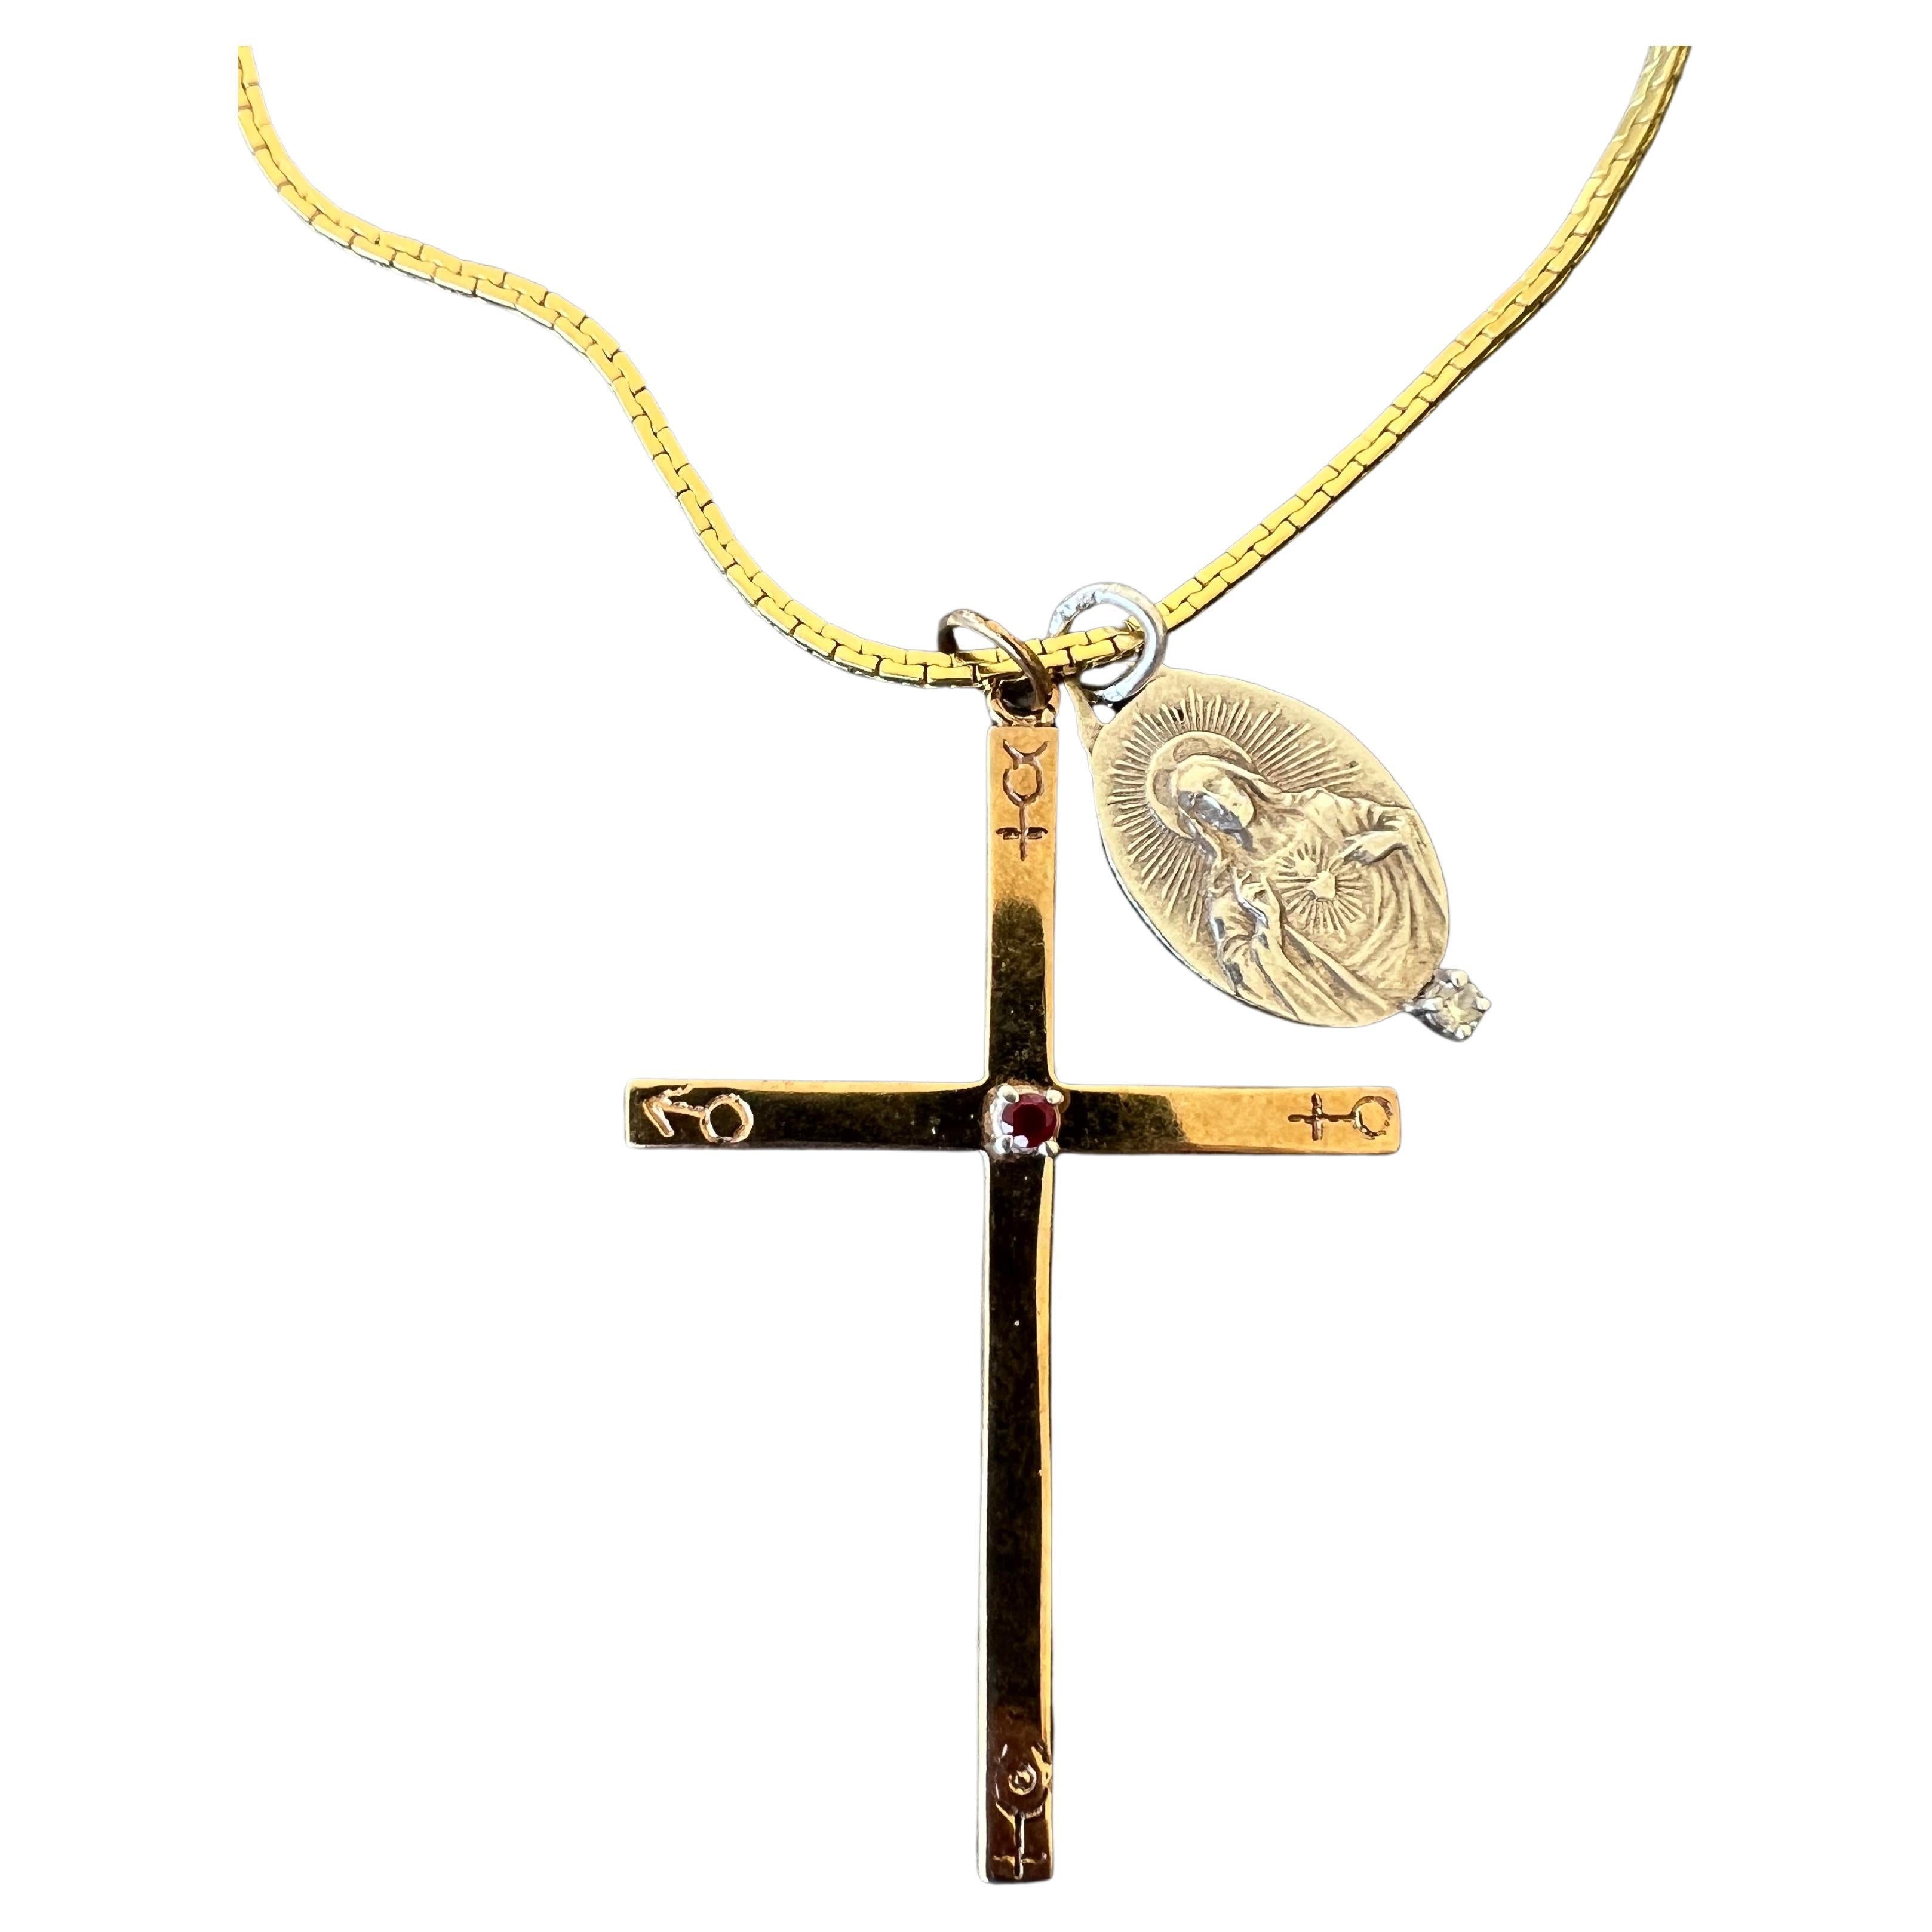 Ruby Cross Necklace Engraved Astrology Symbols White Diamond Jesus Medal

Material: Cross is in polished bronze, Jesus medal is in sterling silver and the chain itself is in gold plated brass

Approximately 28